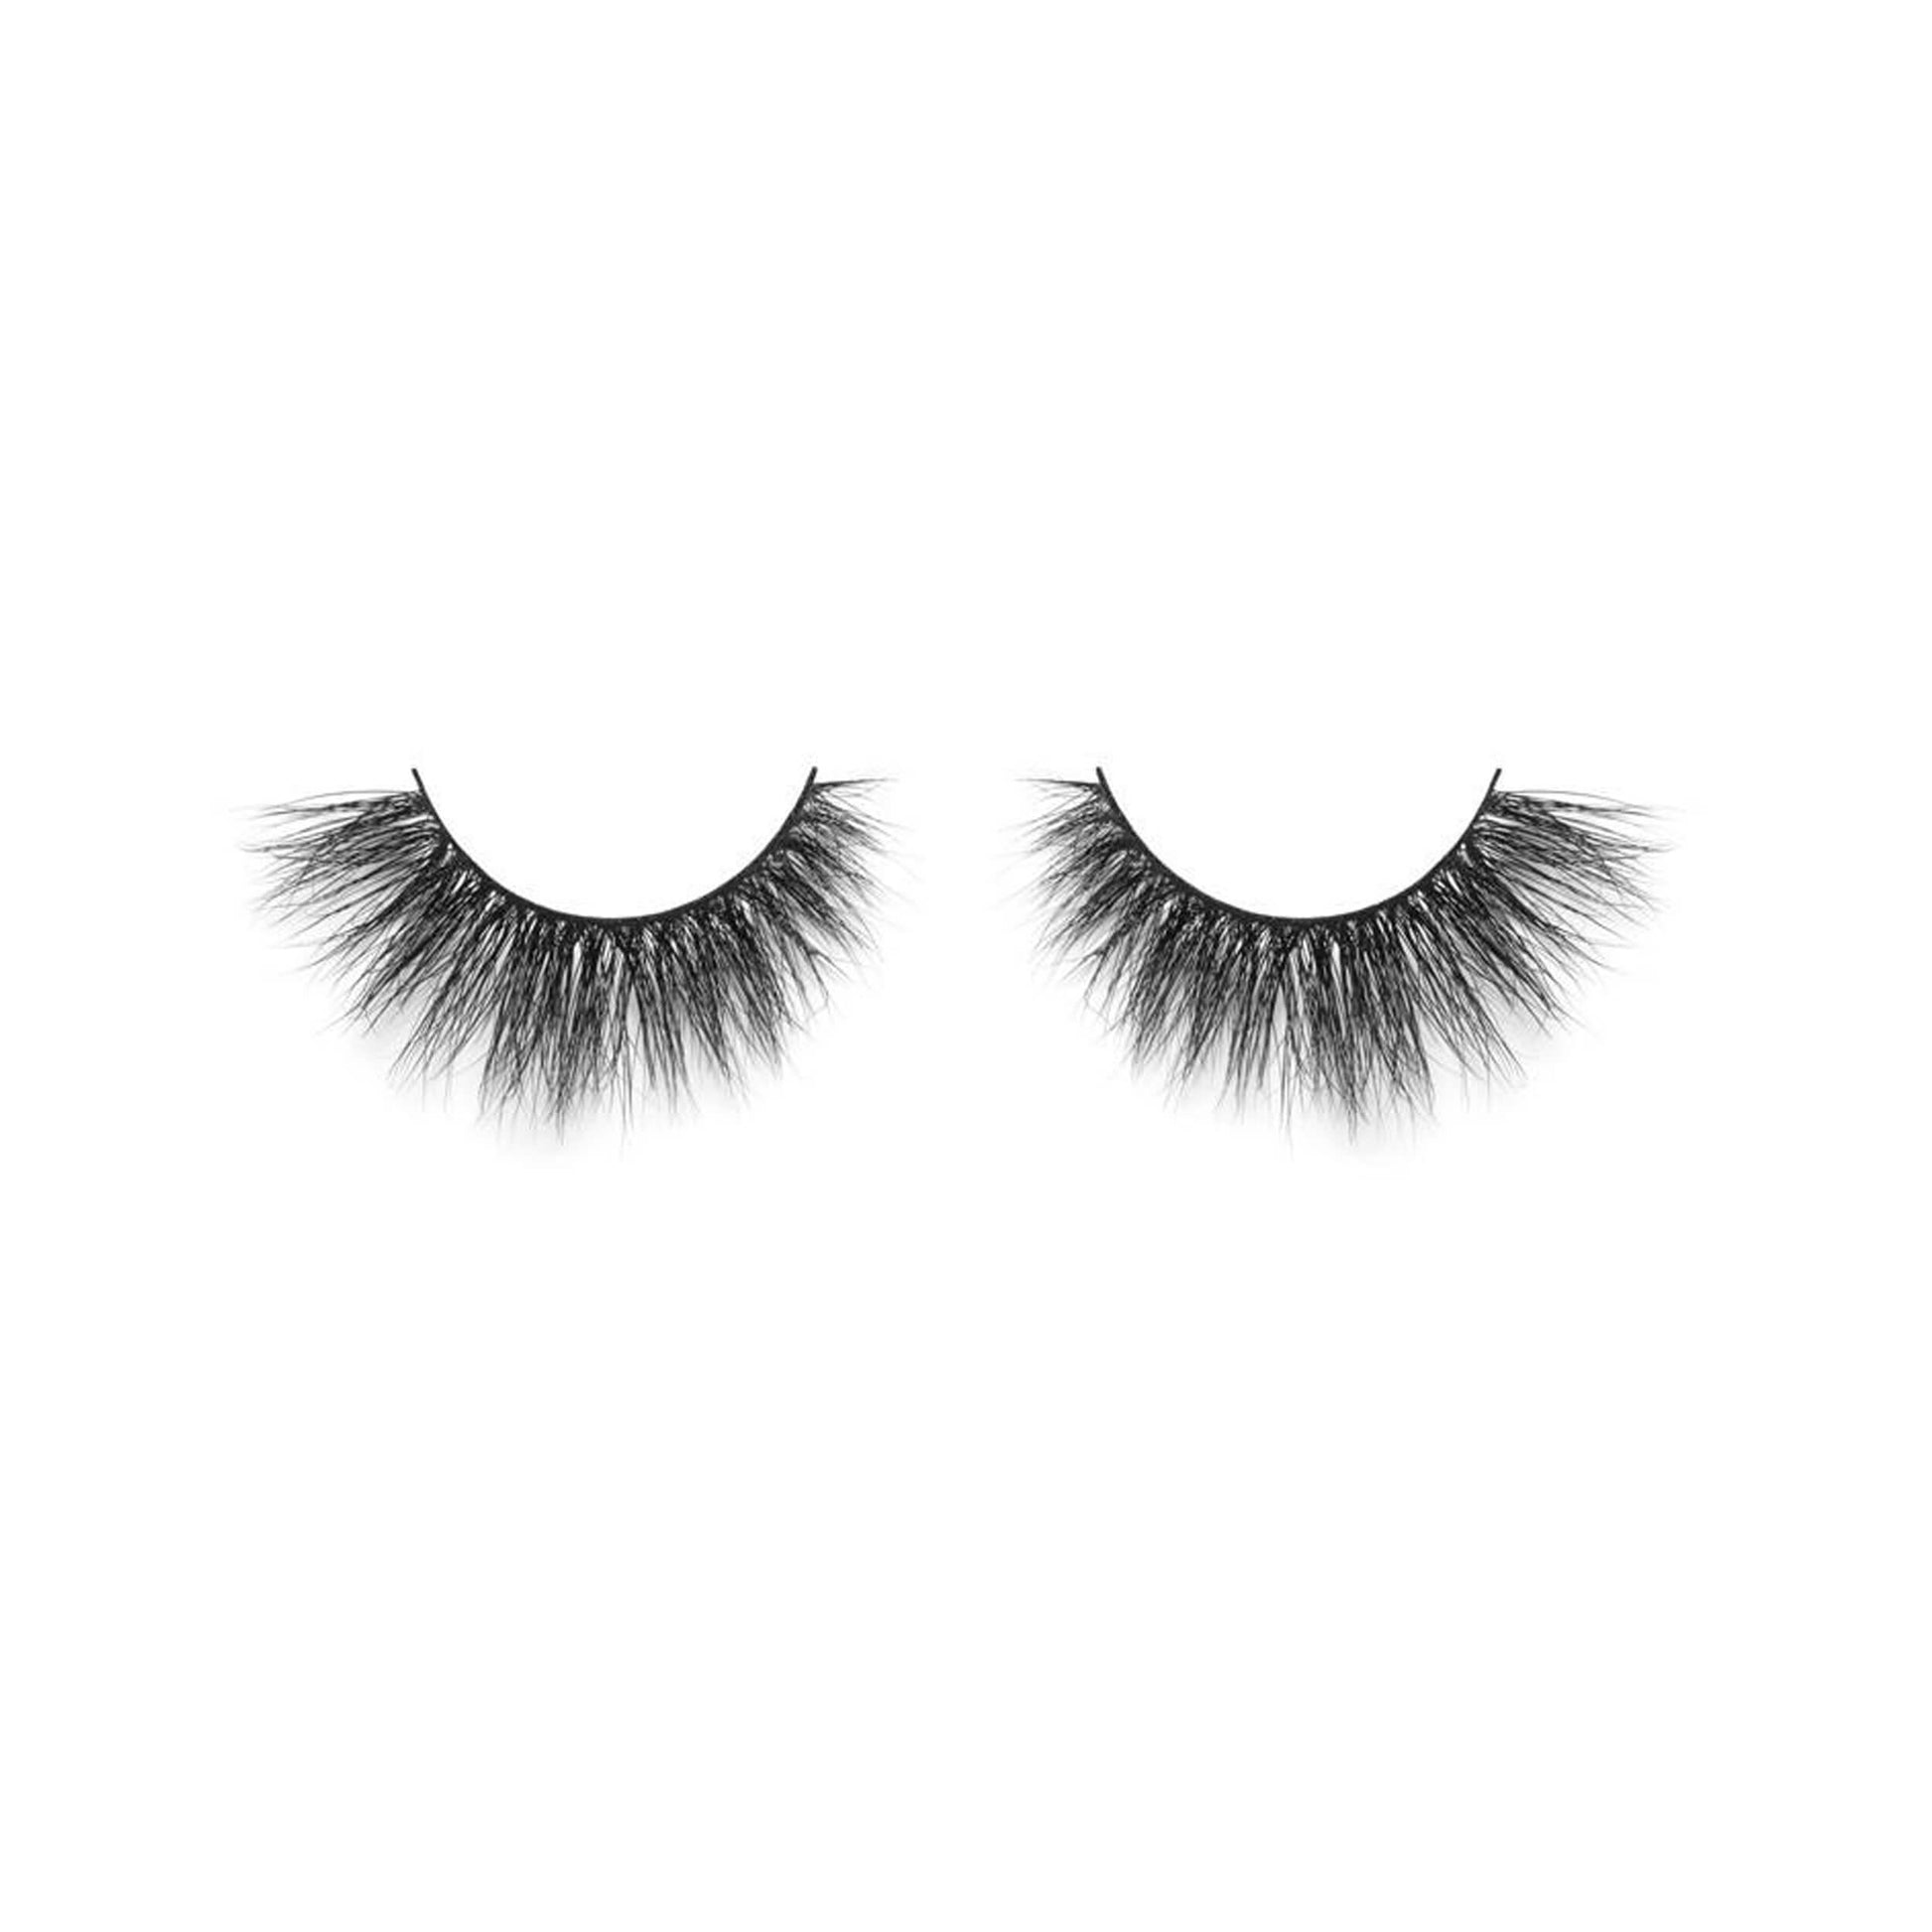 Lilly Lashes Sydney 3D Mink Lashes Open